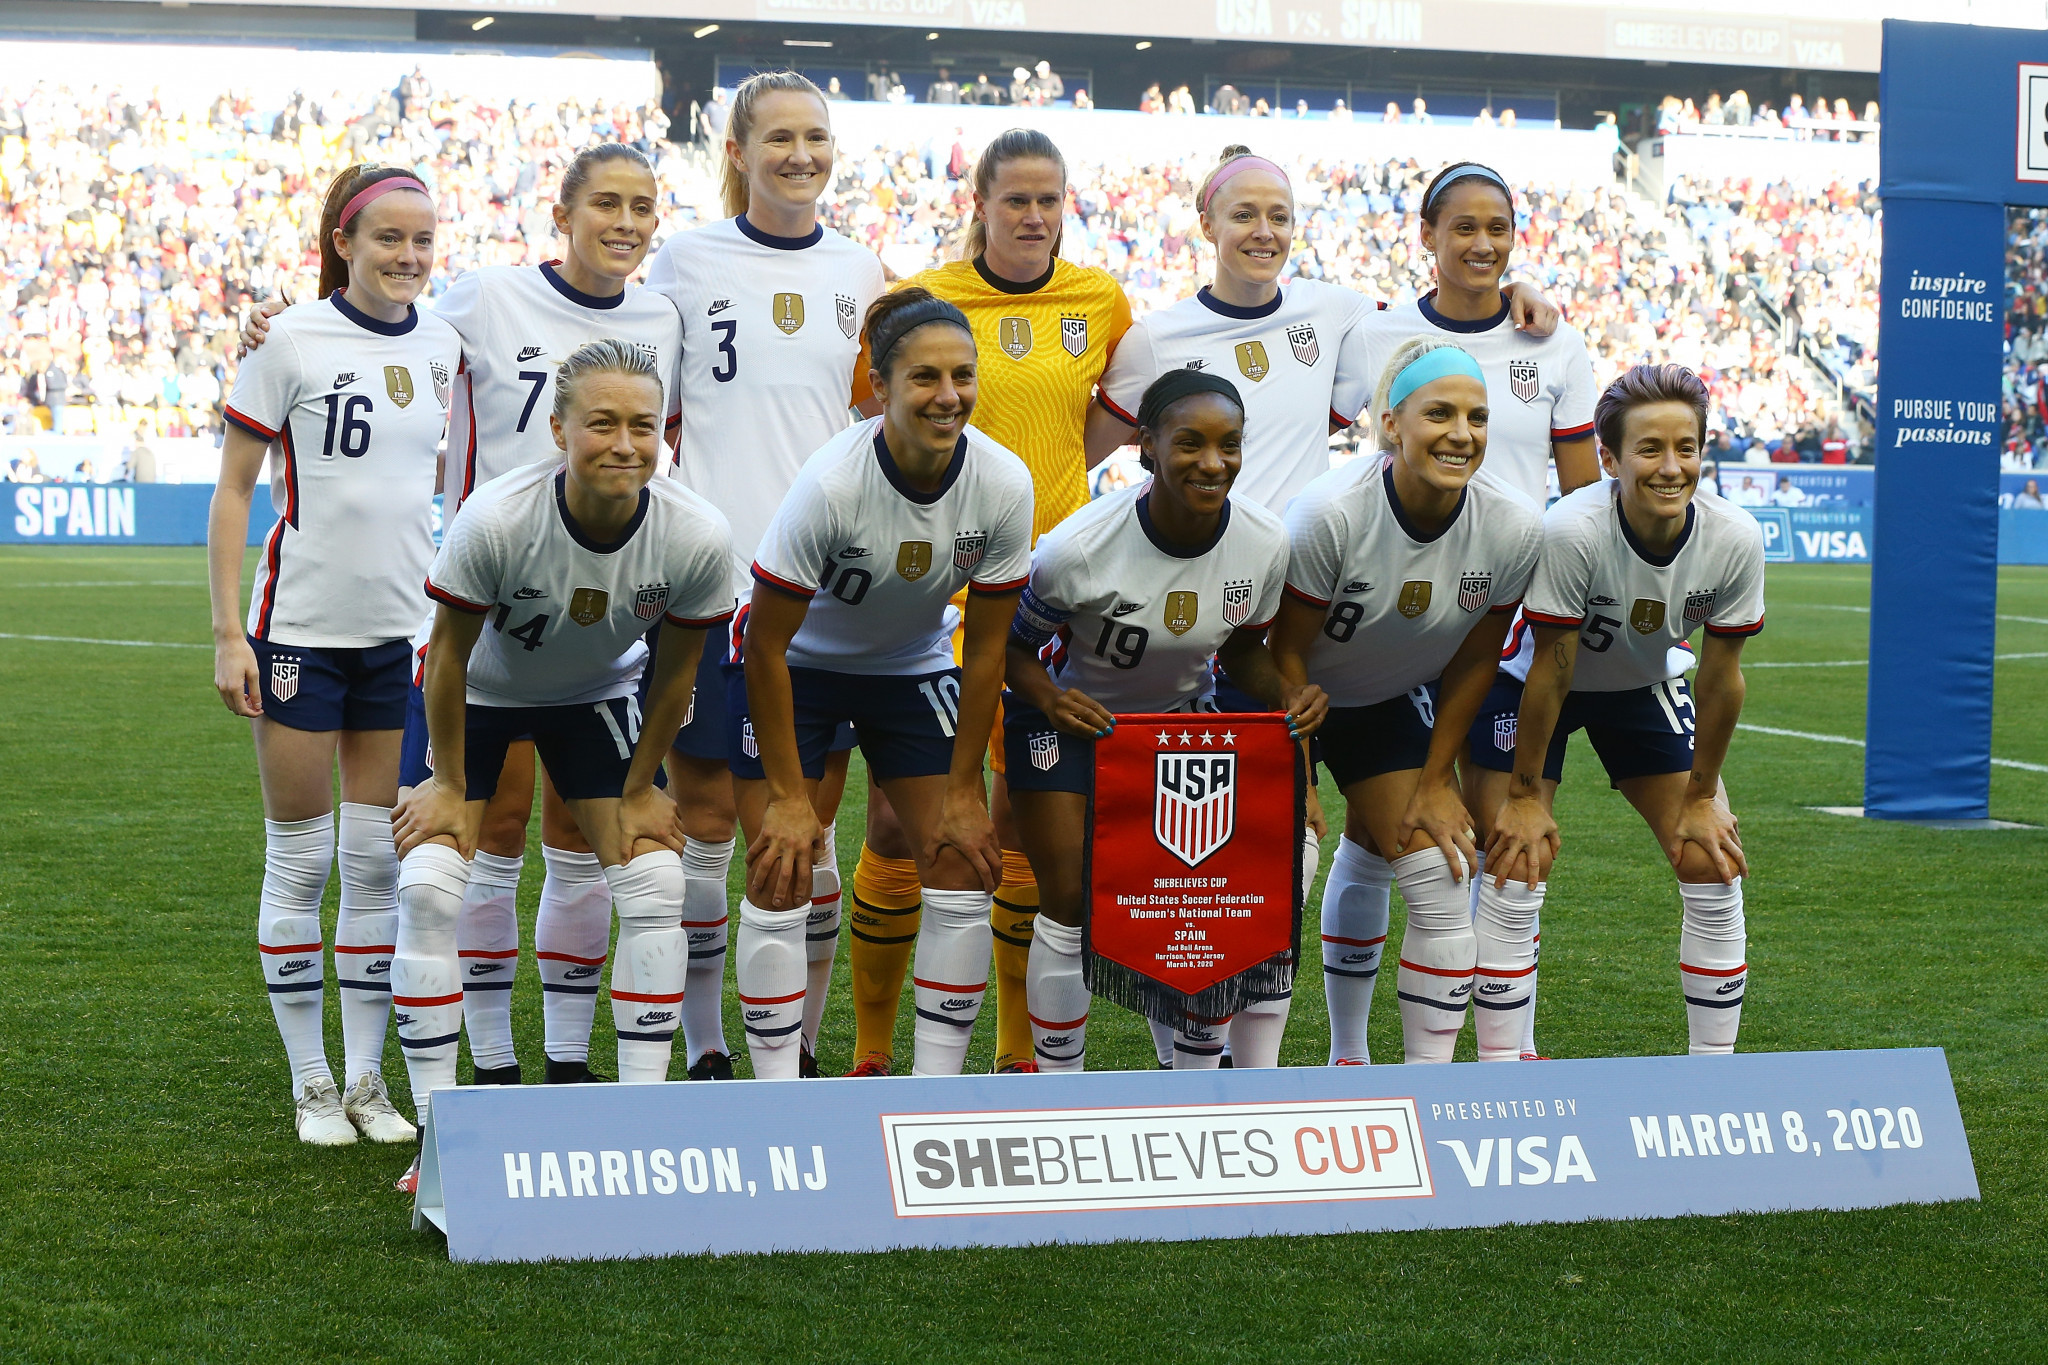 United States women's football team denied immediate appeal of equal pay ruling